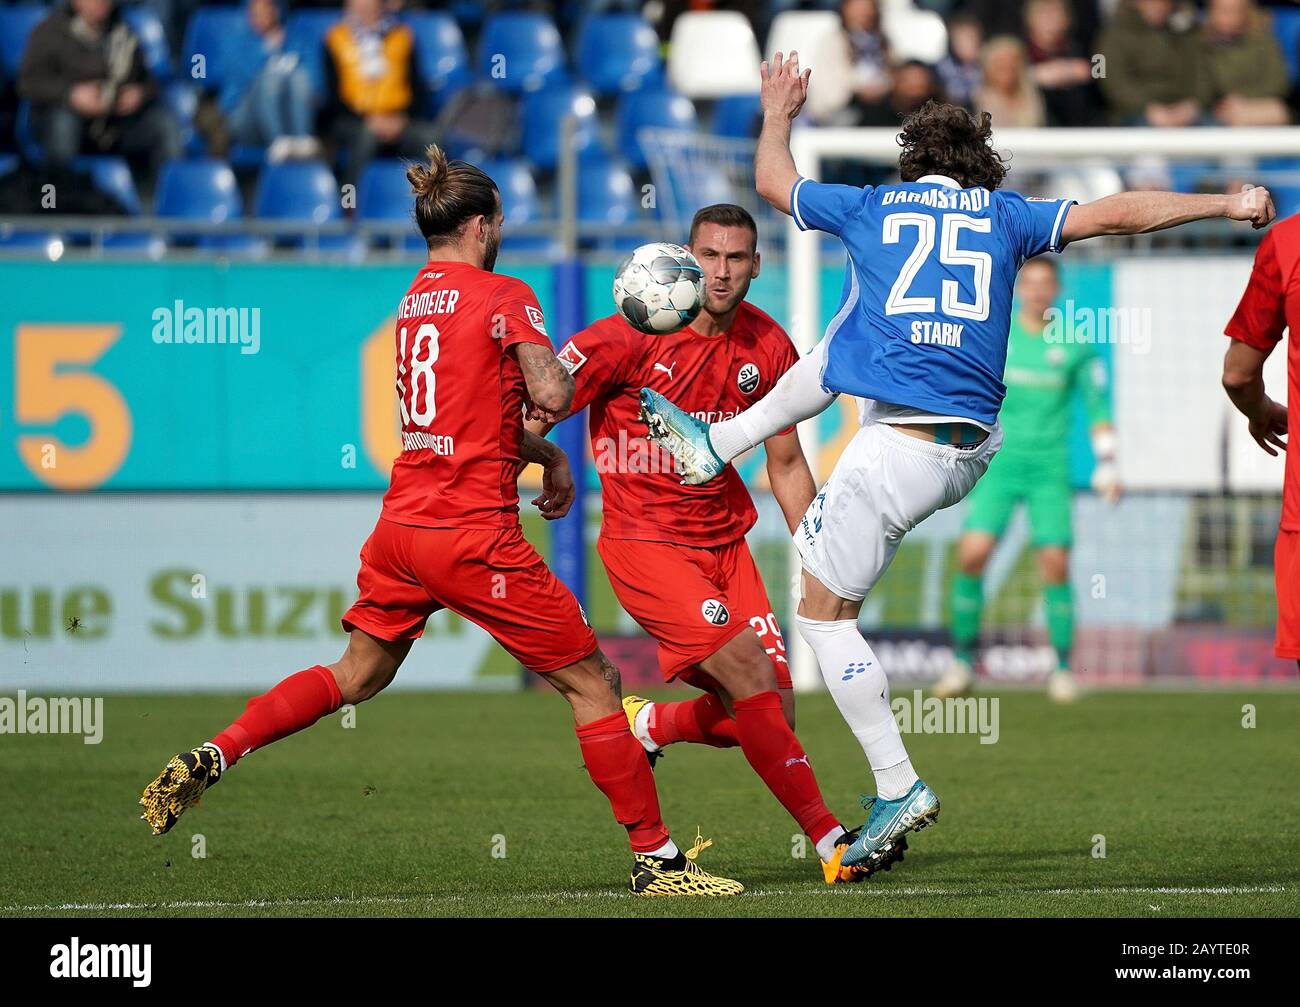 Darmstadt, Germany. 16th Feb, 2020. Football: 2nd Bundesliga, Darmstadt 98 - SV Sandhausen, 22nd matchday Darmstadt's Yannik Stark (R) in a duel with Dennis Diekmeier (L) and Ivan Paurevic (M) from Sandhausen. Credit: Hasan Bratic/dpa - IMPORTANT NOTE: In accordance with the regulations of the DFL Deutsche Fußball Liga and the DFB Deutscher Fußball-Bund, it is prohibited to exploit or have exploited in the stadium and/or from the game taken photographs in the form of sequence images and/or video-like photo series./dpa/Alamy Live News Stock Photo